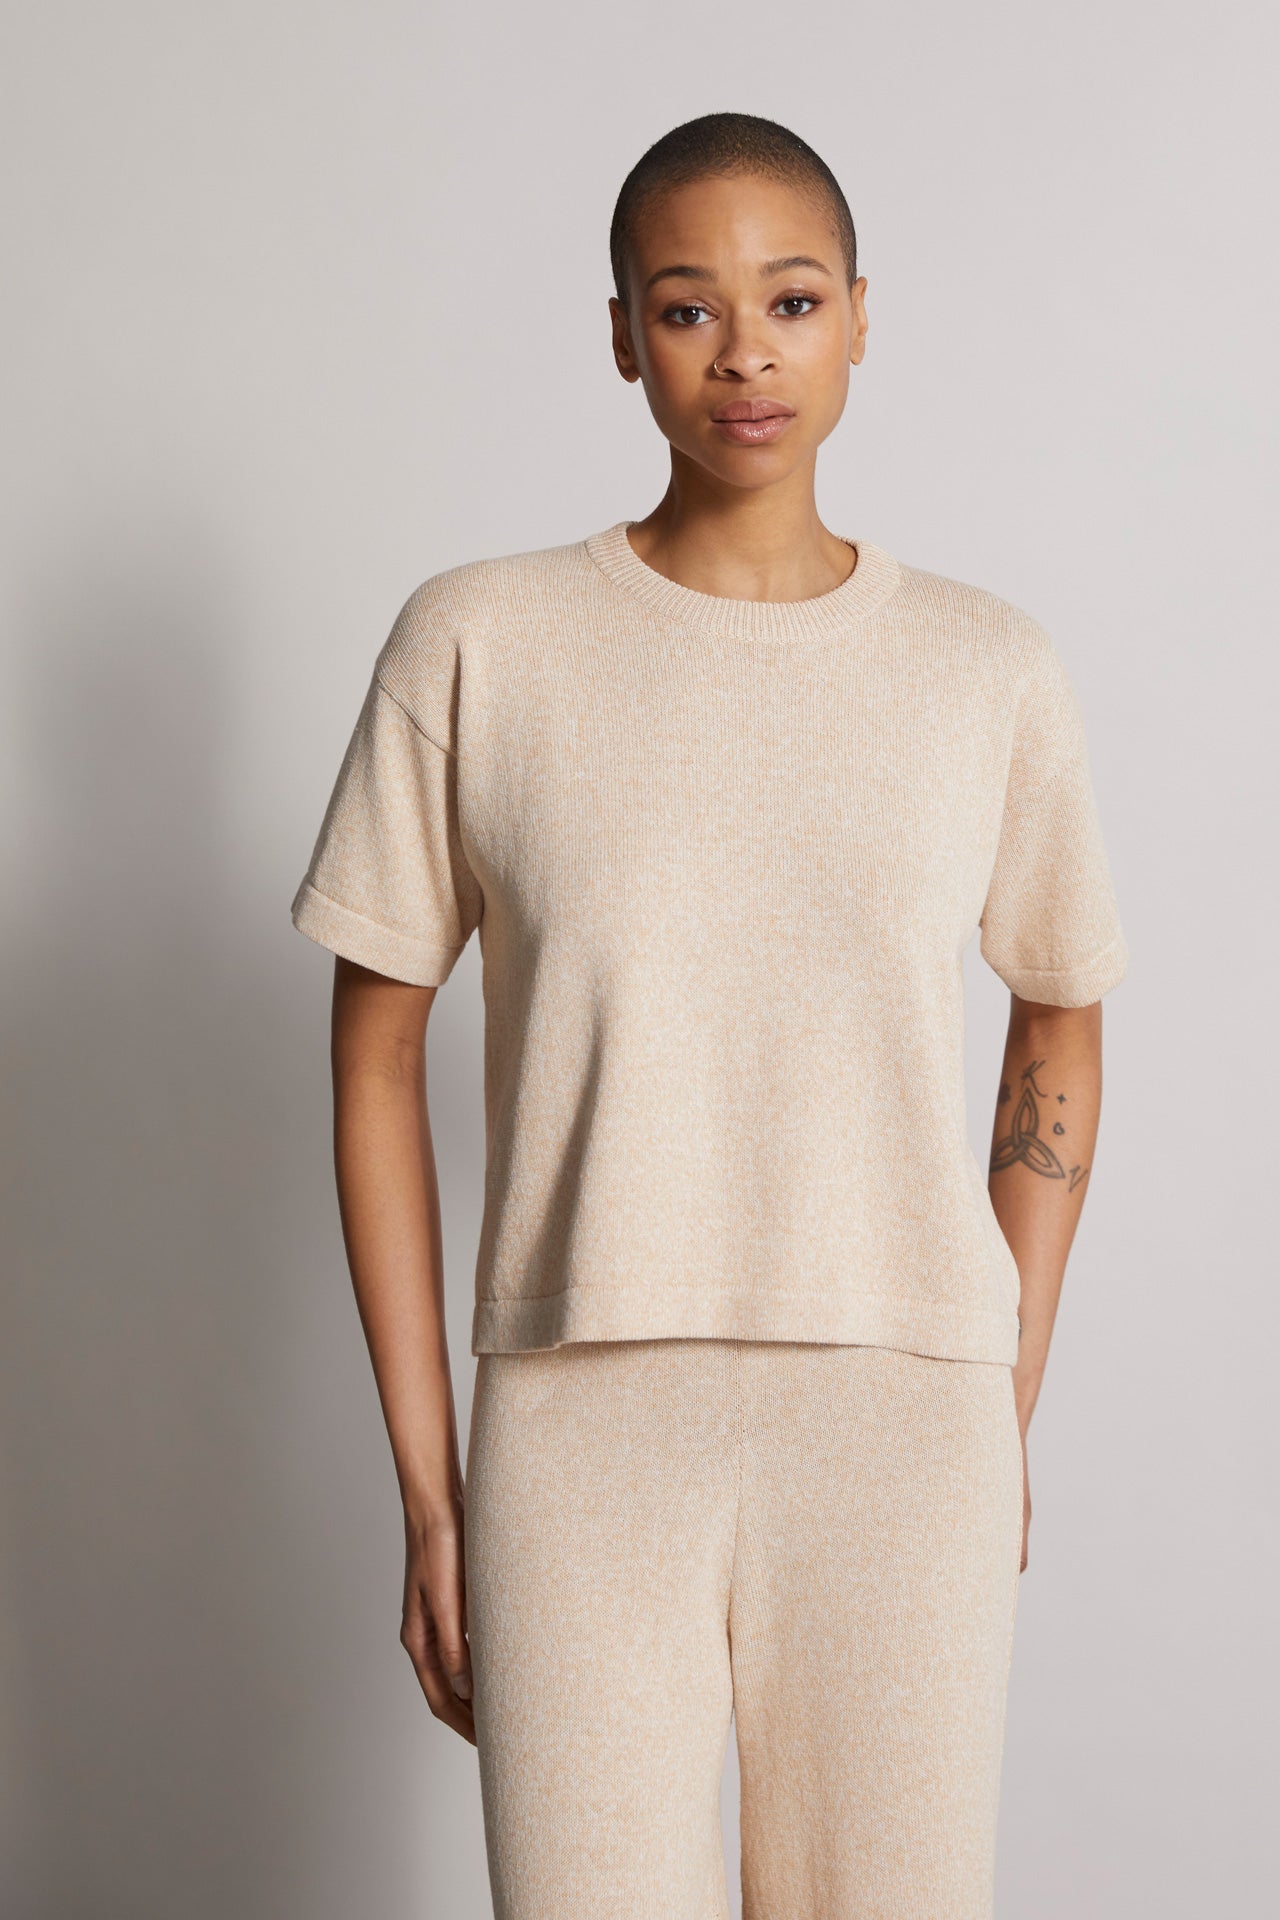 Formia cotton linen knitted t-shirt